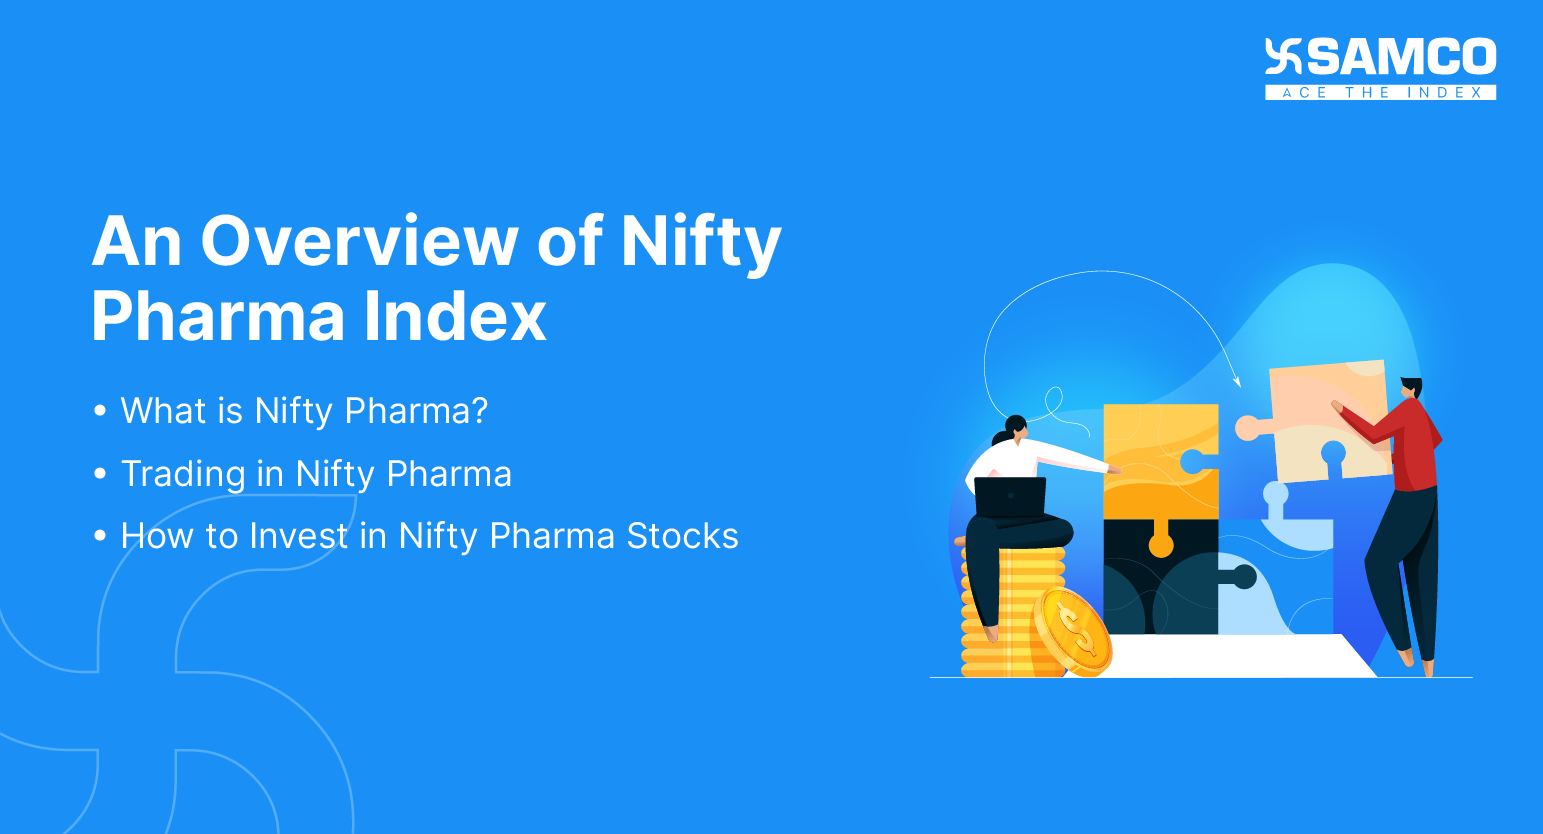 An Overview of Nifty Pharma Index